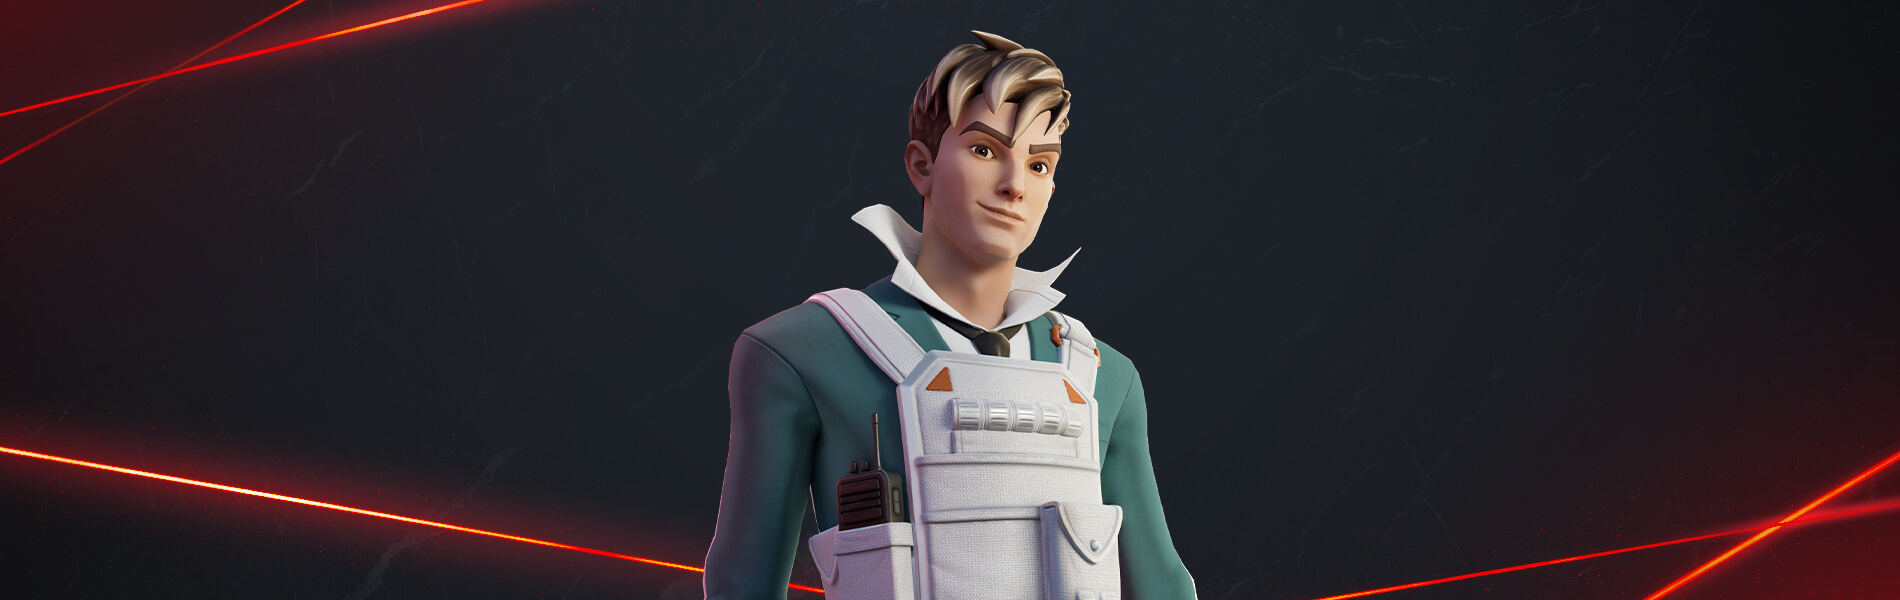 Fortnite Nolan Chance-Outfit